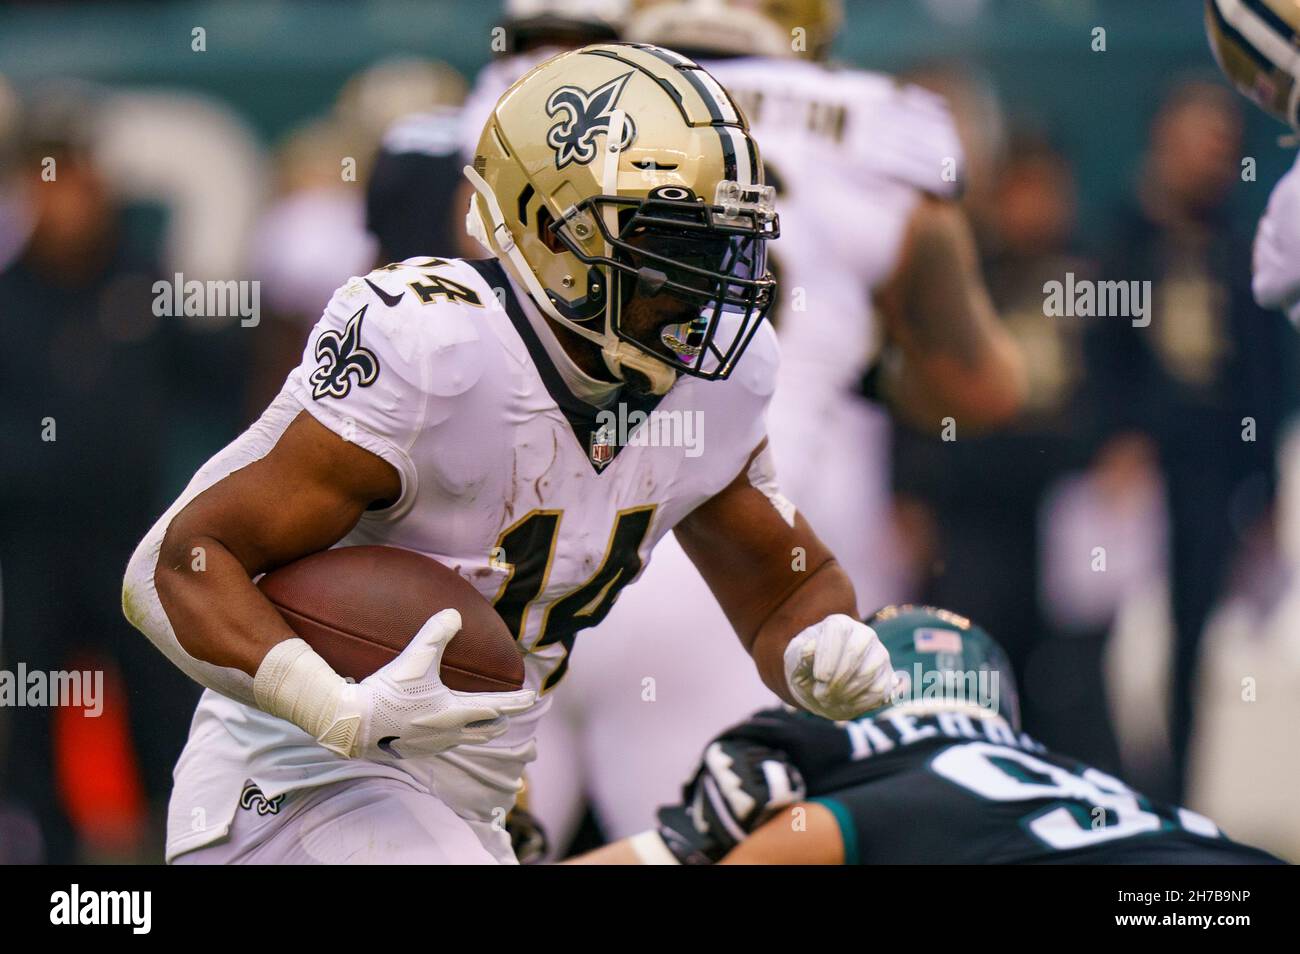 Philadelphia, Pennsylvania, USA. 21st Nov, 2021. New Orleans Saints running back Mark Ingram (14) runs with the ball during the NFL game between the New Orleans Saints and the Philadelphia Eagles at Lincoln Financial Field in Philadelphia, Pennsylvania. Christopher Szagola/CSM/Alamy Live News Stock Photo